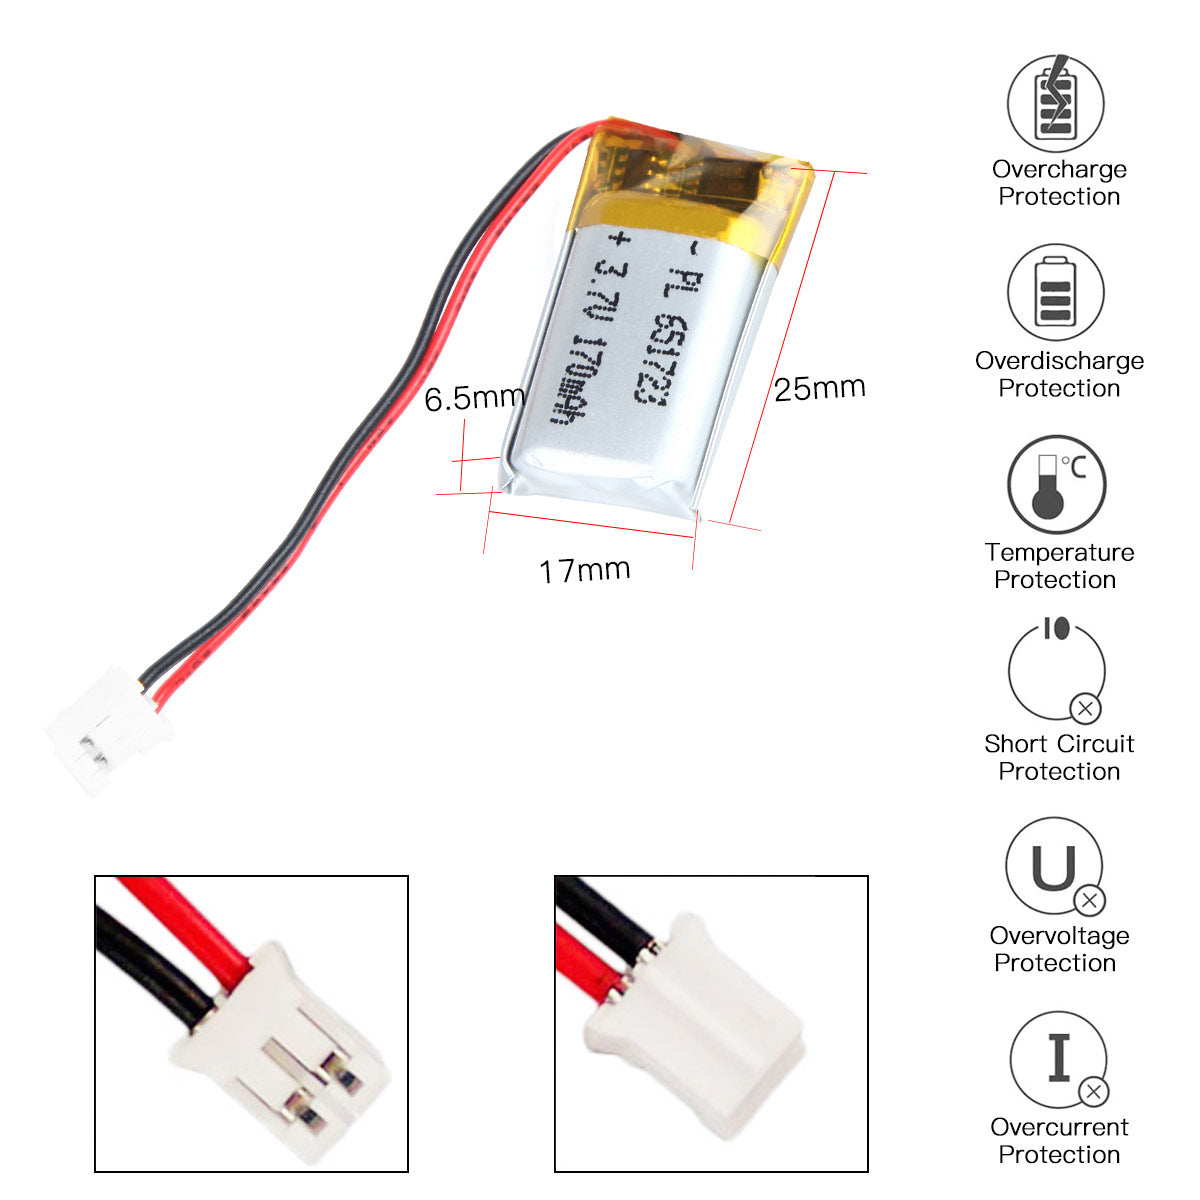 YDL 3.7V 170mAh 651723 Rechargeable Lithium Polymer Battery Length 25mm